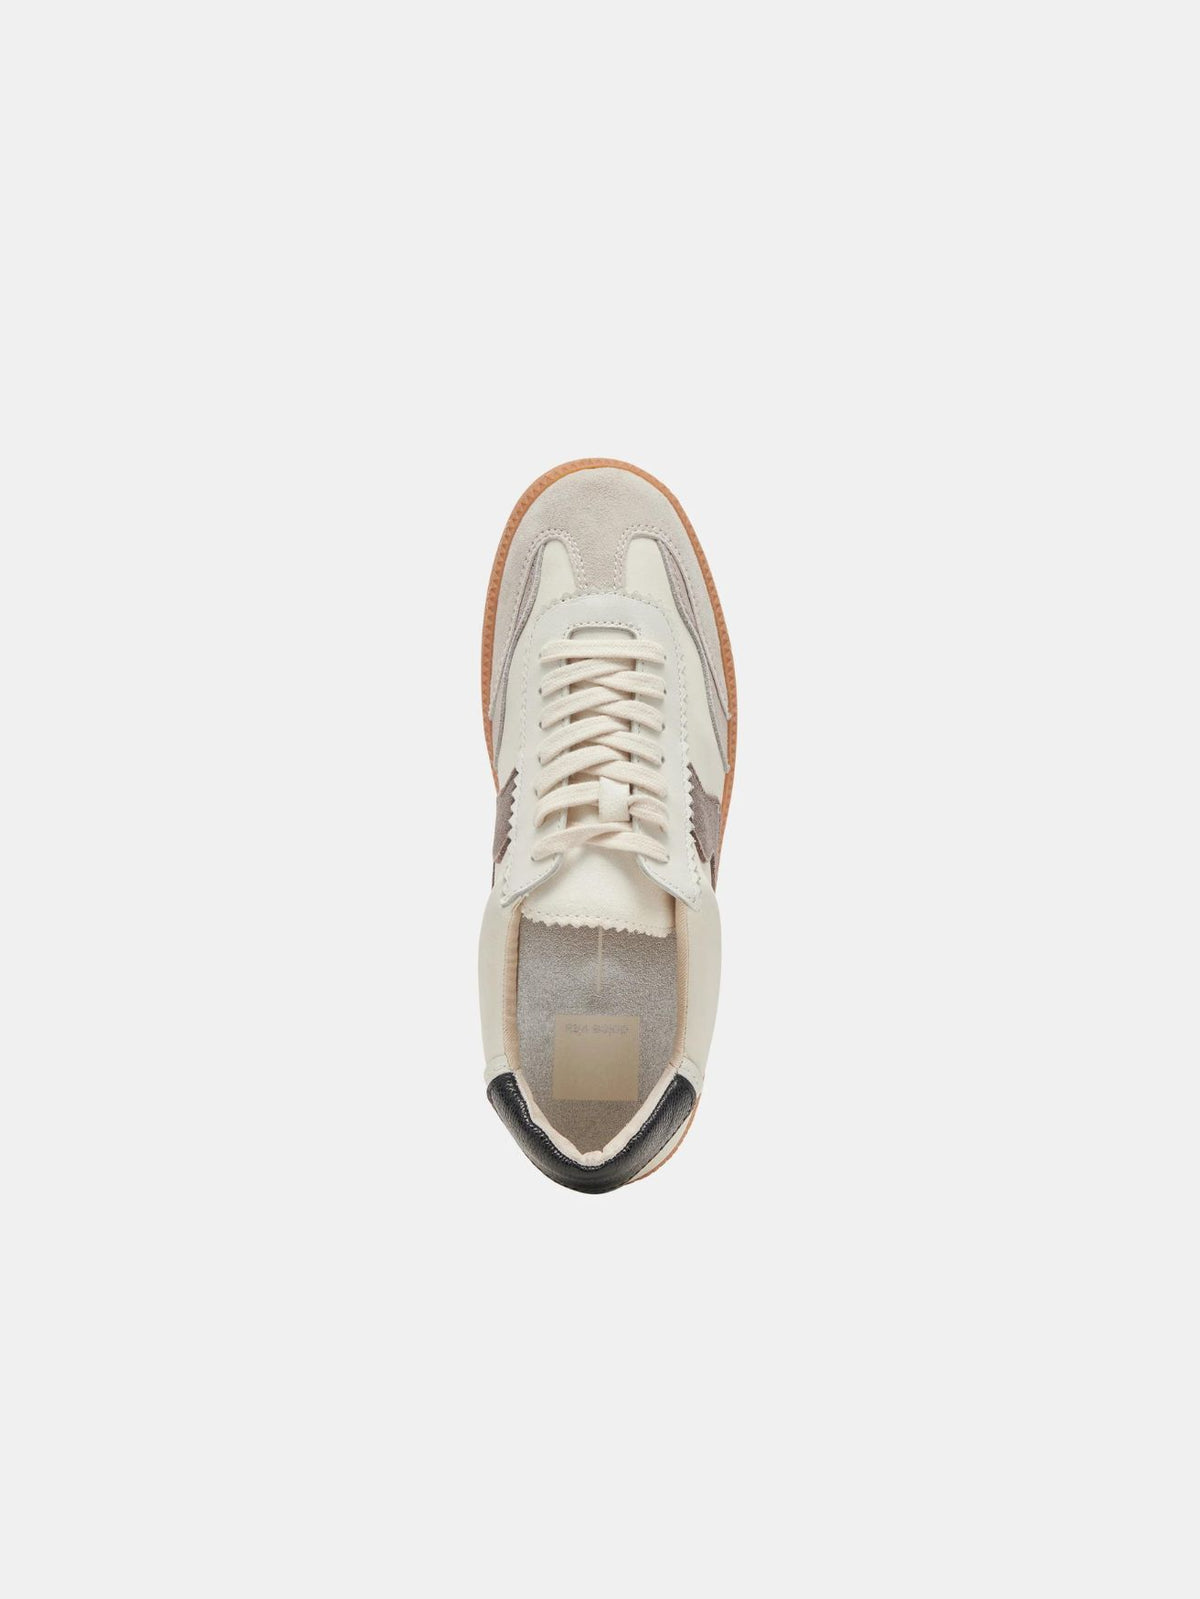 dolce vita notice sneakers in white and grey leather-top view